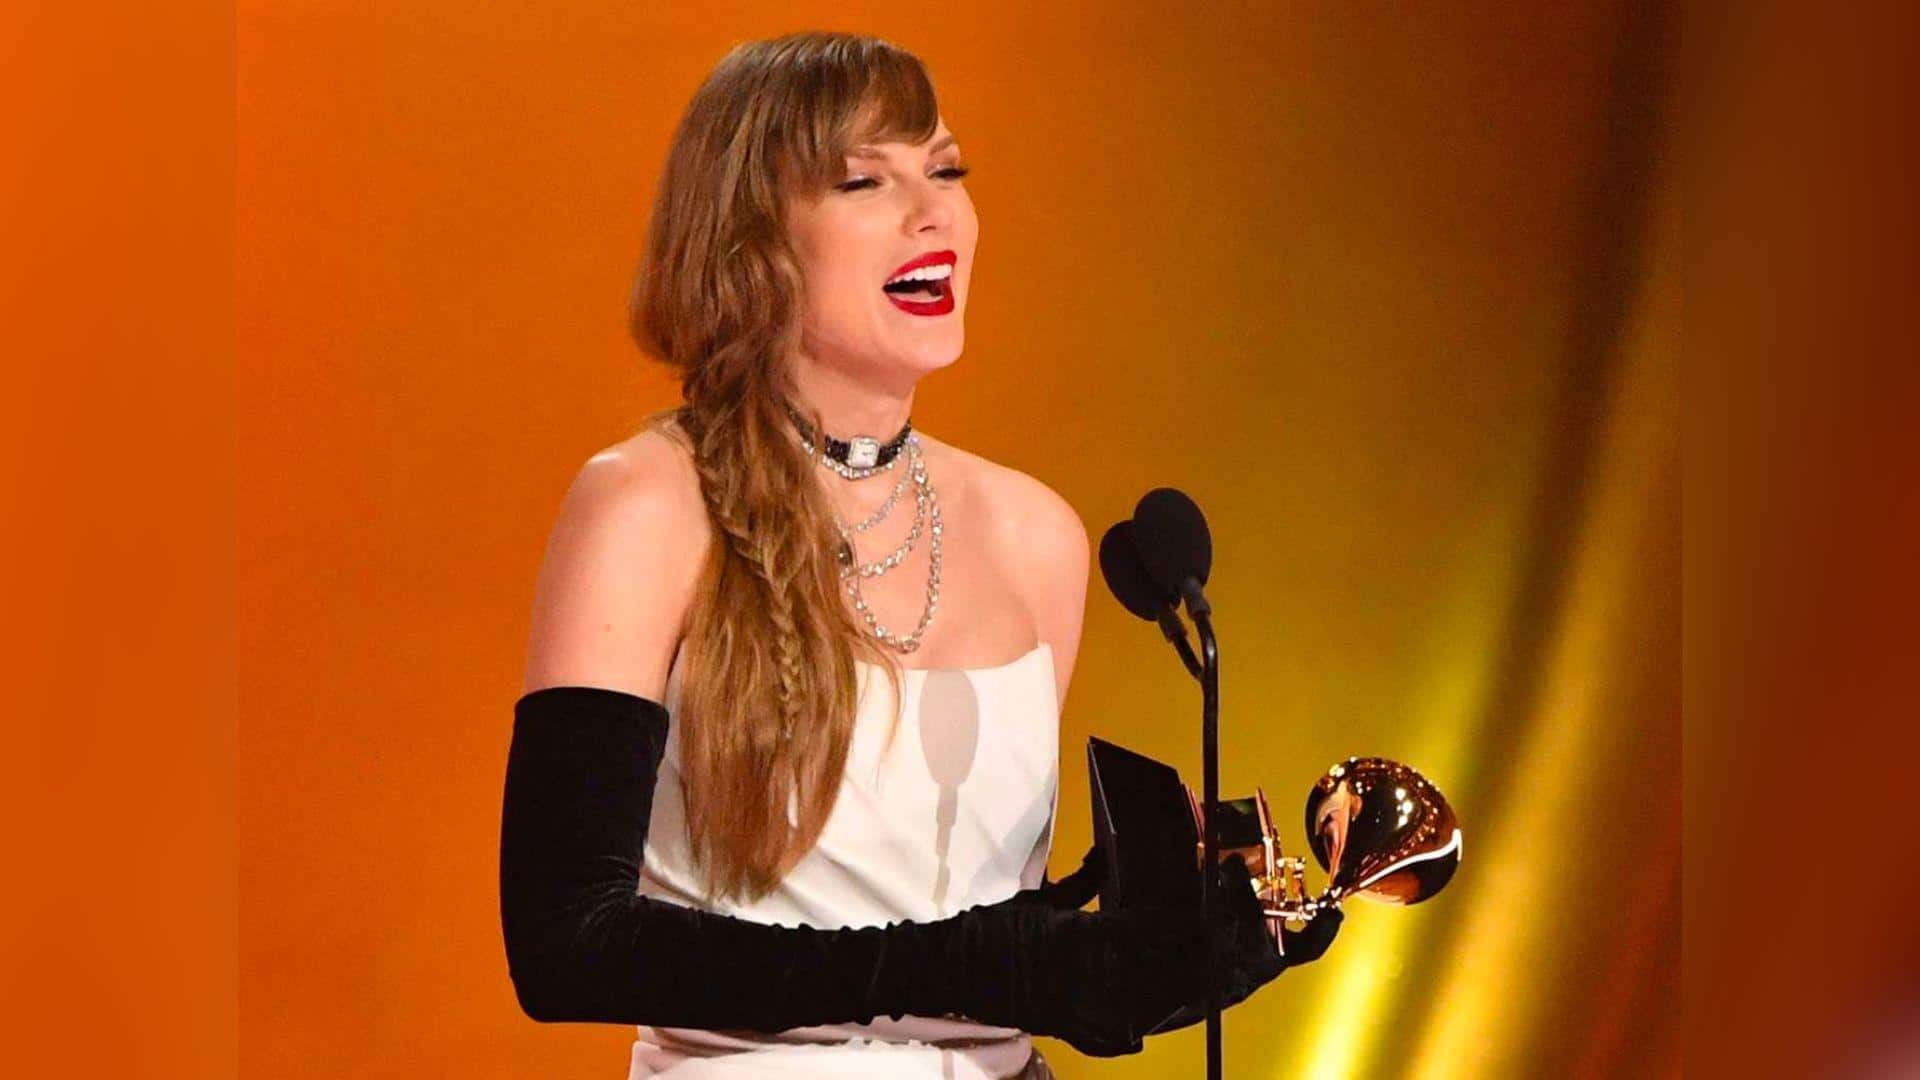 Here's what Taylor Swift did after her historic Grammys win